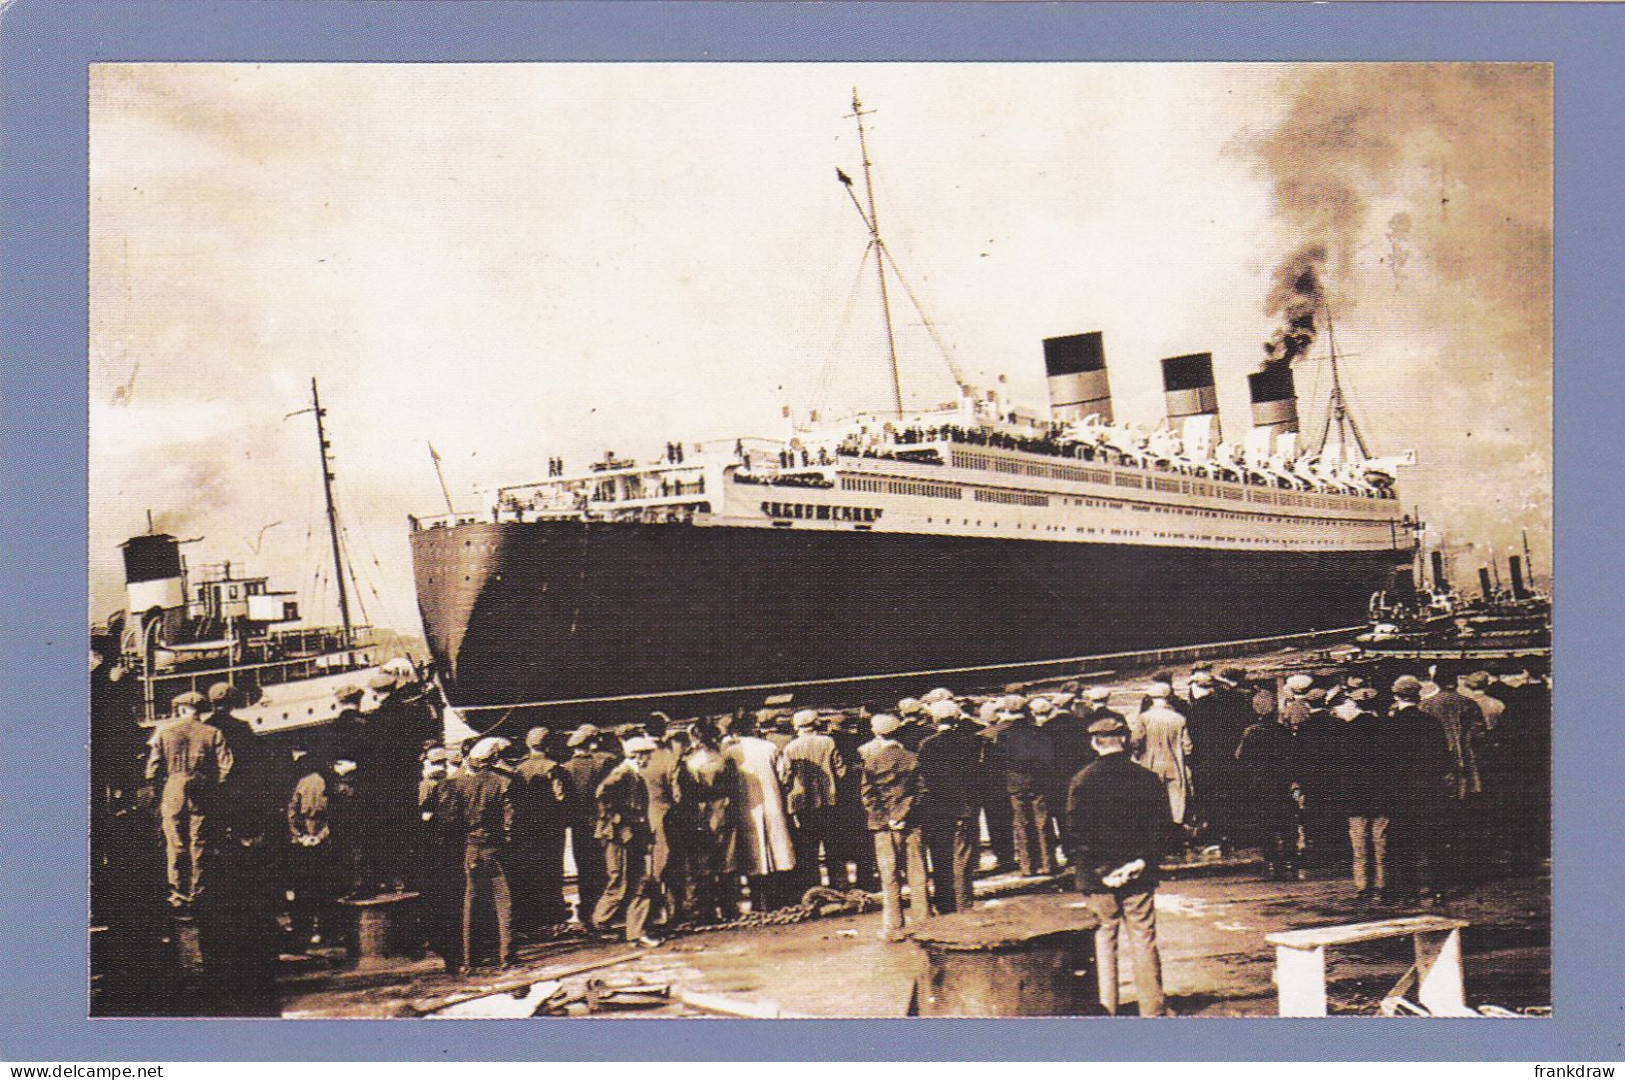 Nostalgia Postcard - The Queen Mary Sails, 24th March 1936  - VG - Unclassified